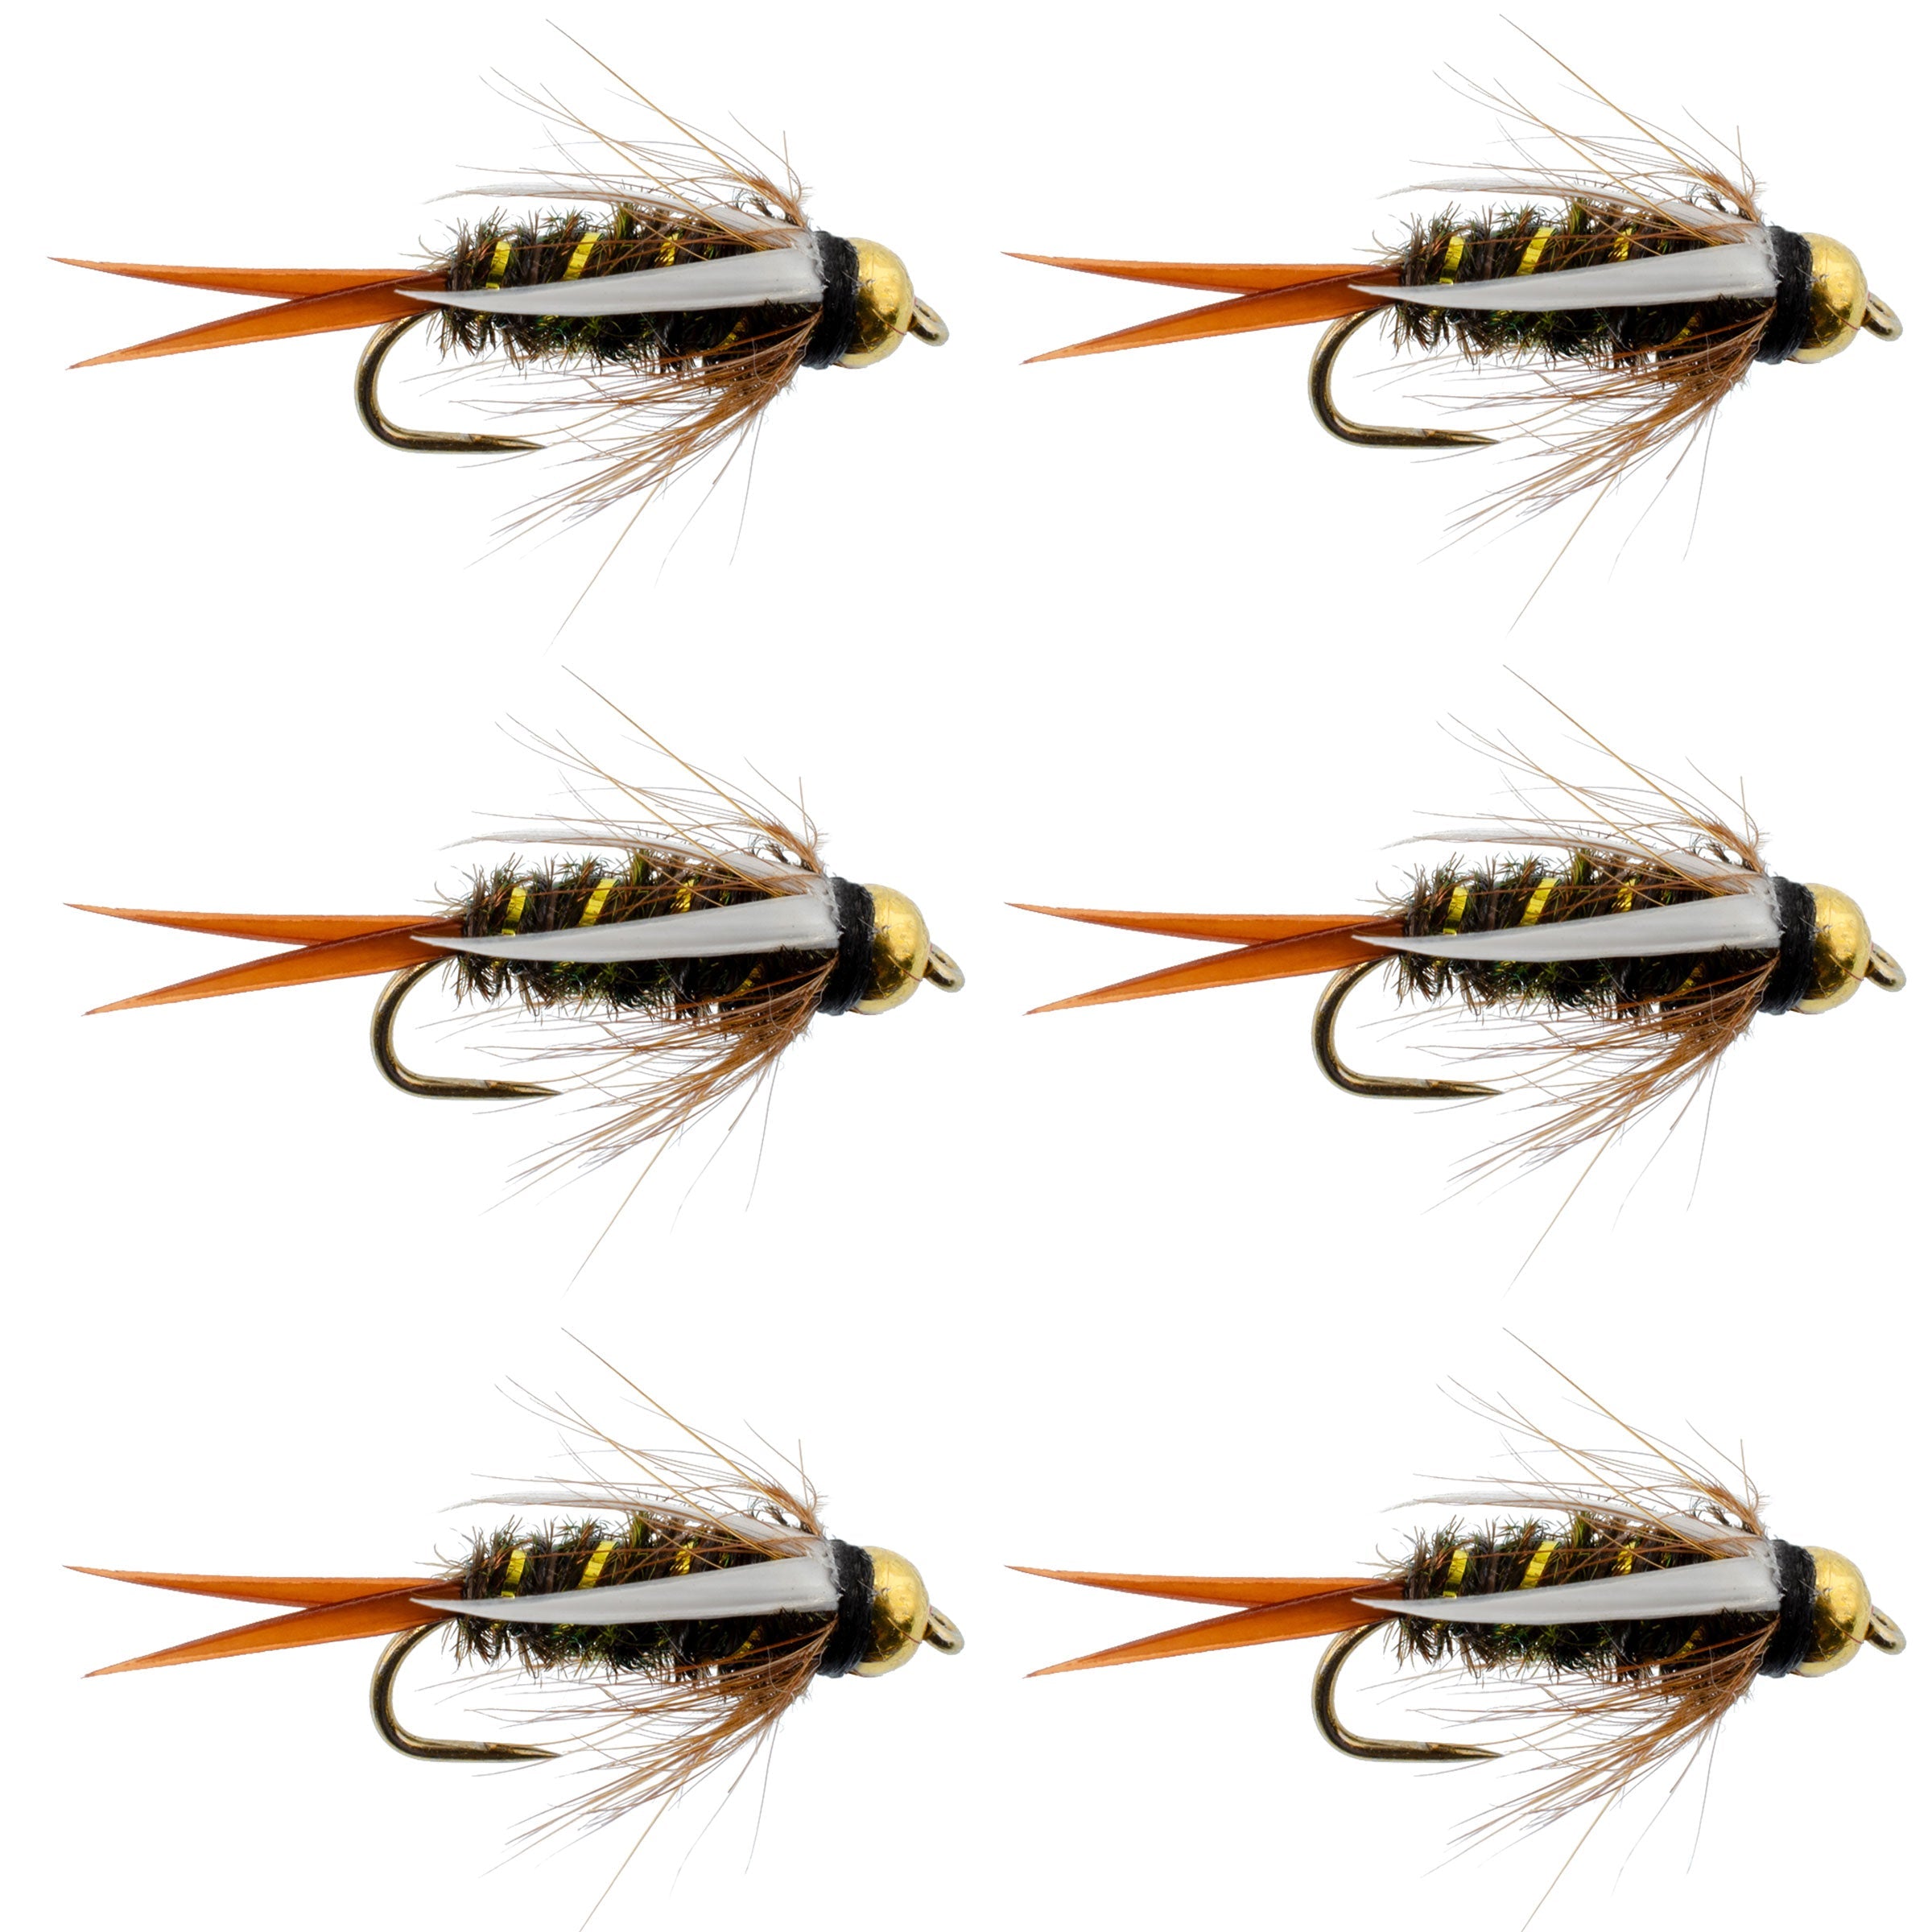 Barbless Bead Head Prince Nymph Fly Fishing Flies - Set of 6 Flies Hook Size 14